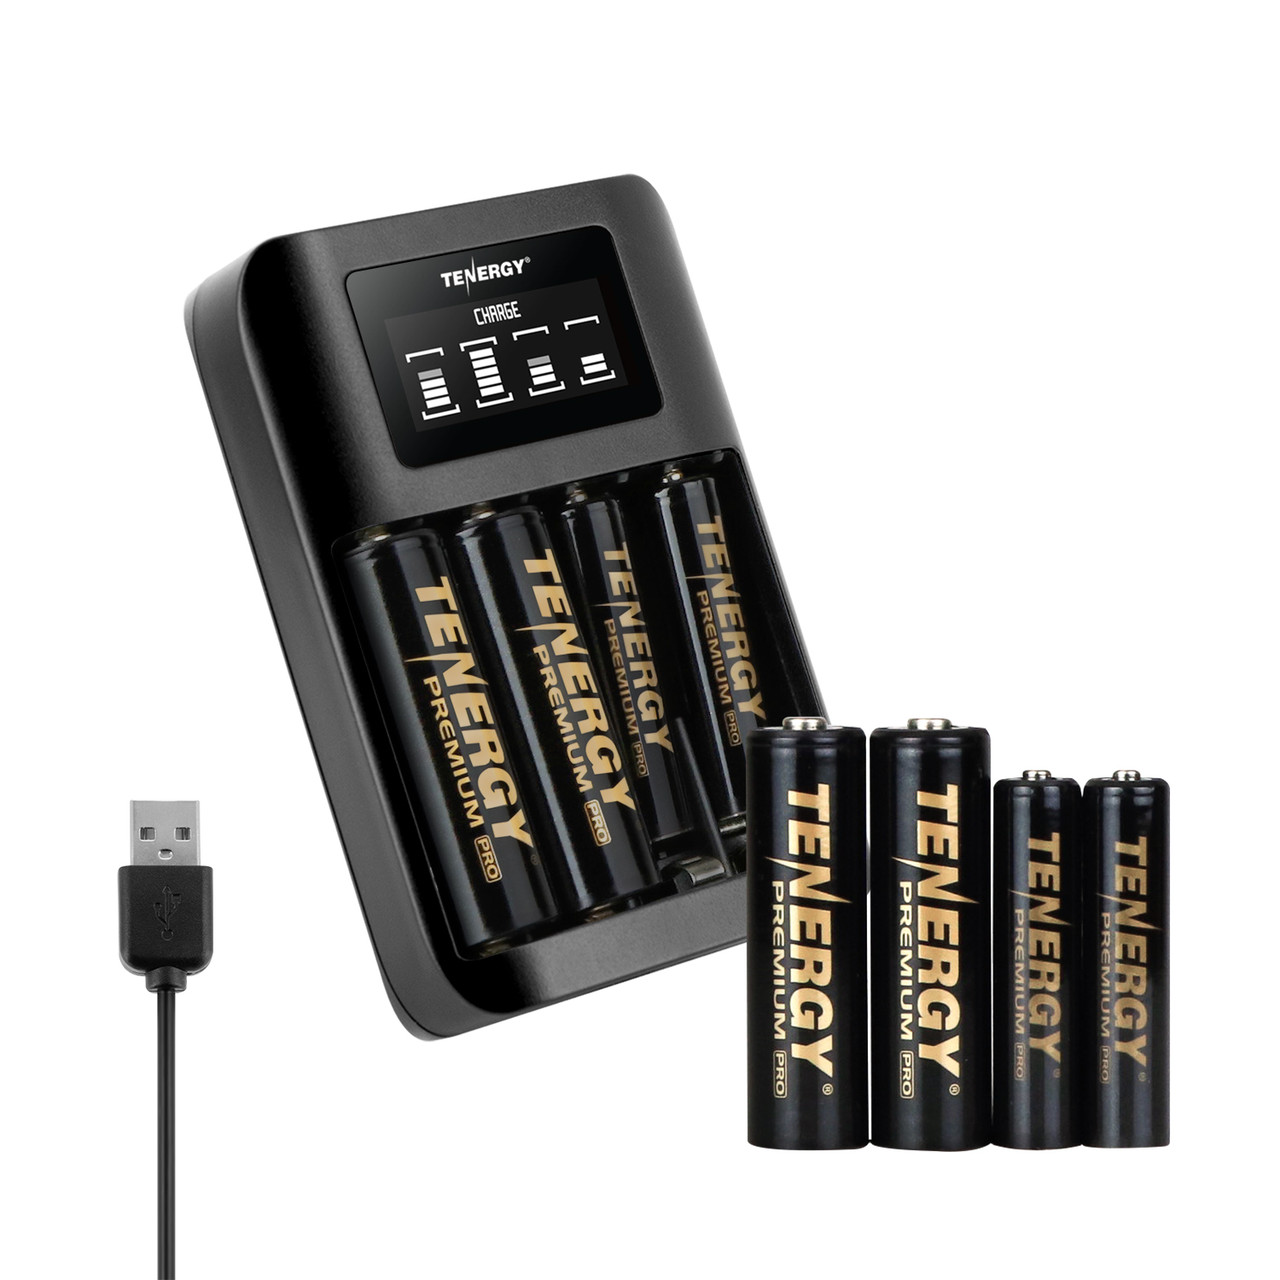 Tenergy Combo TN474U Battery Charger with 4 Pack Premium Pro AA and 4 Pack AAA Rechargeable Batteries